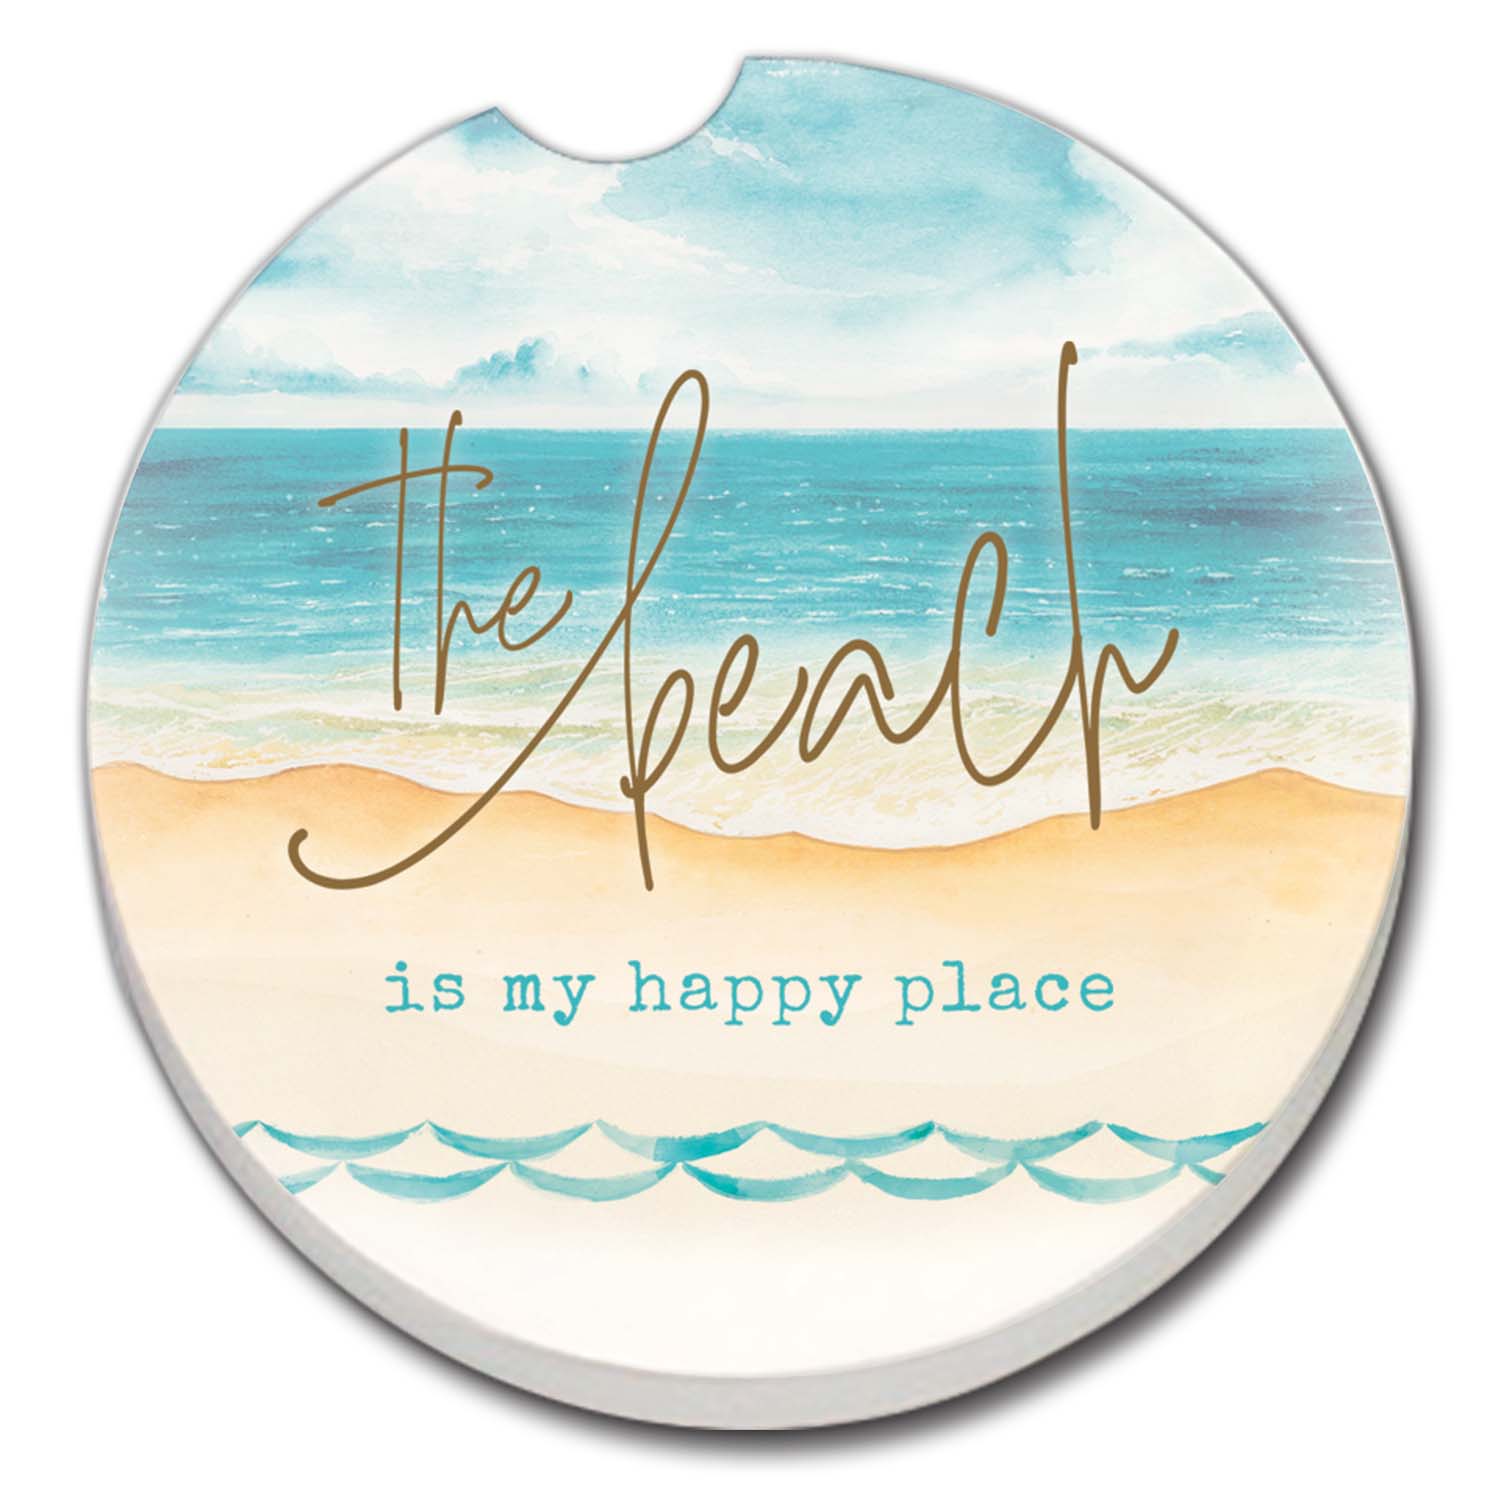 My Happy Place Absorbent Stone Car Coaster (2pk)